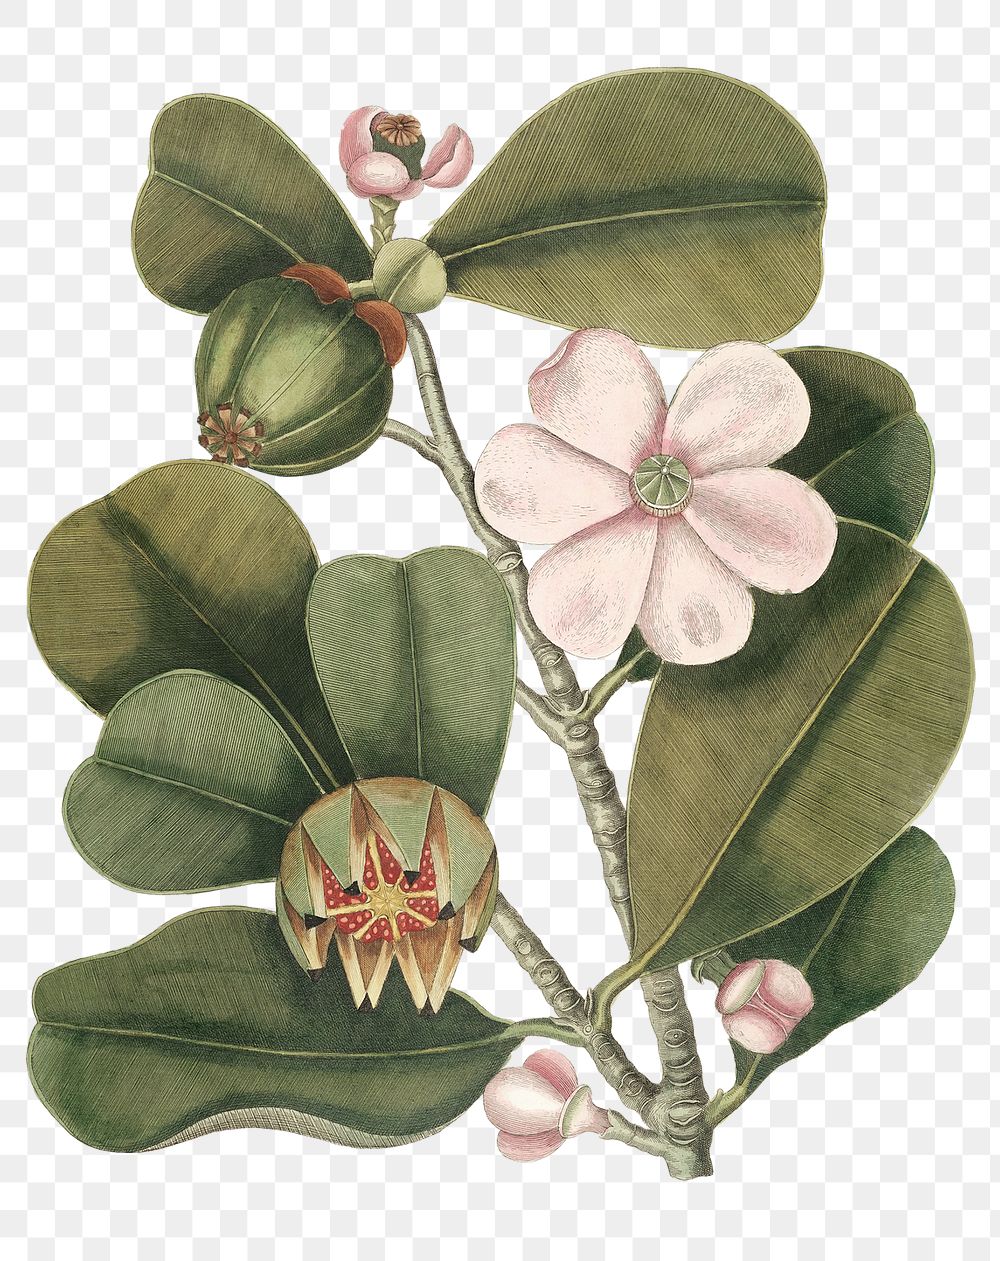 Vintage balsam tree png sticker, botanical illustration, remix from the artwork of Mark Catesby